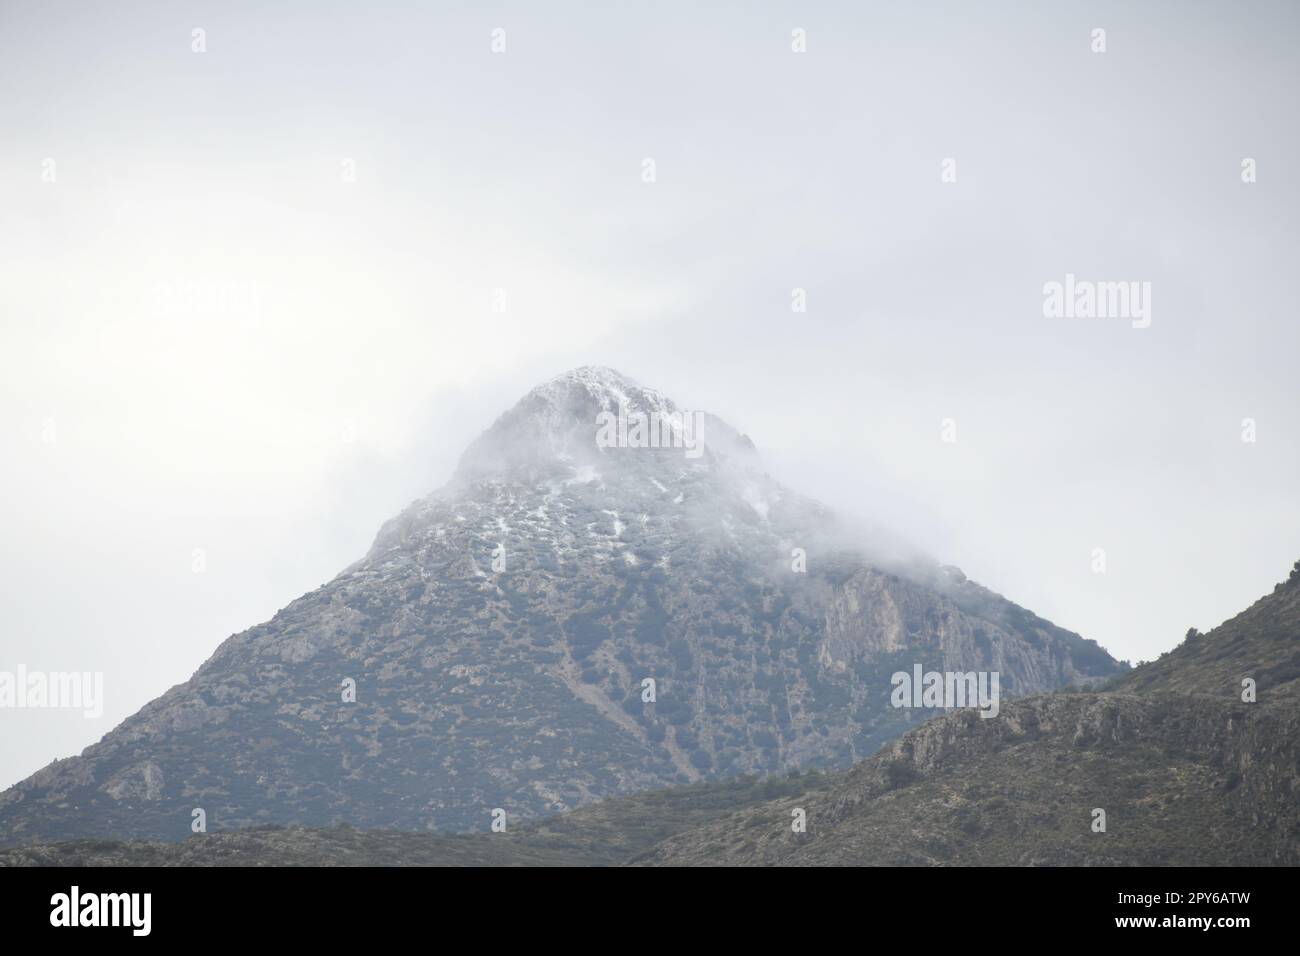 very rare snow in the mountains of Guadalest, Alicante province, Costa Blanca, Spain Stock Photo